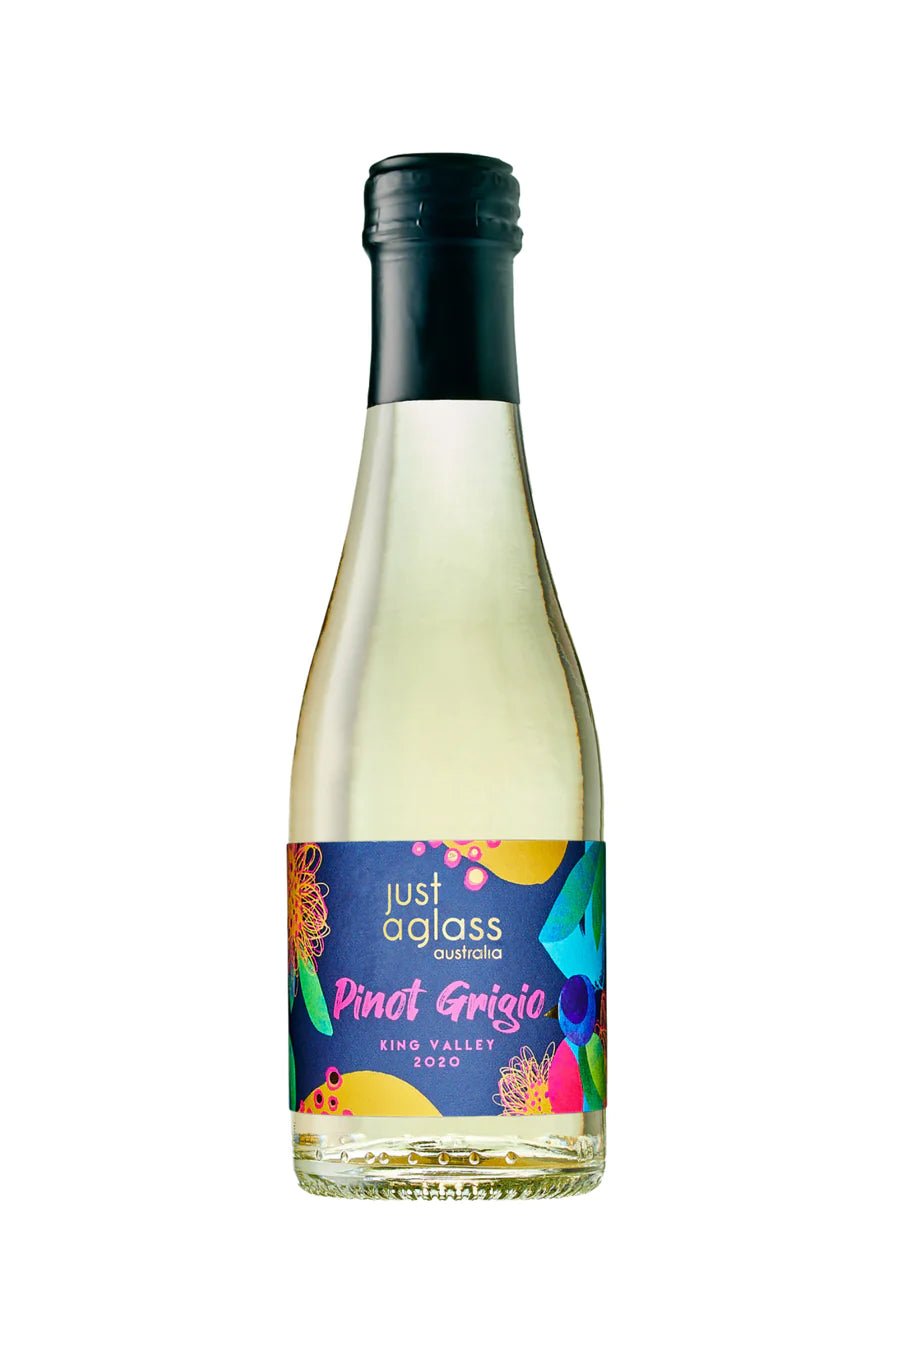 Just a Glass King Valley Pinot Grigio - 200ml Piccolo